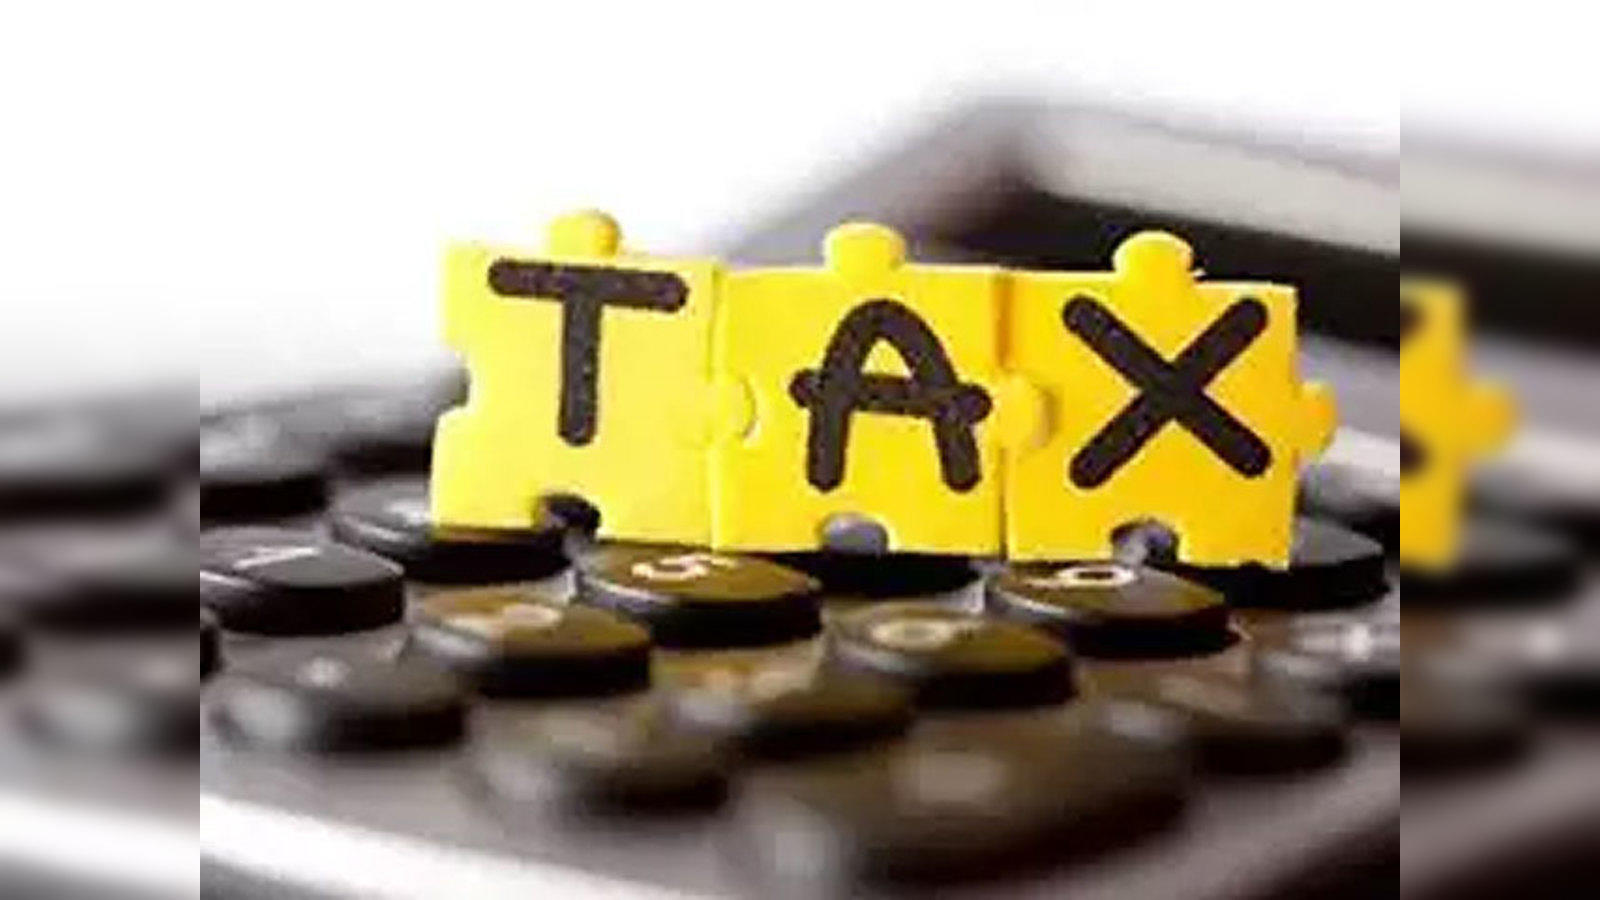 Income Tax hack: How to save money beyond Rs 1.5 lakh limit of Section 80C